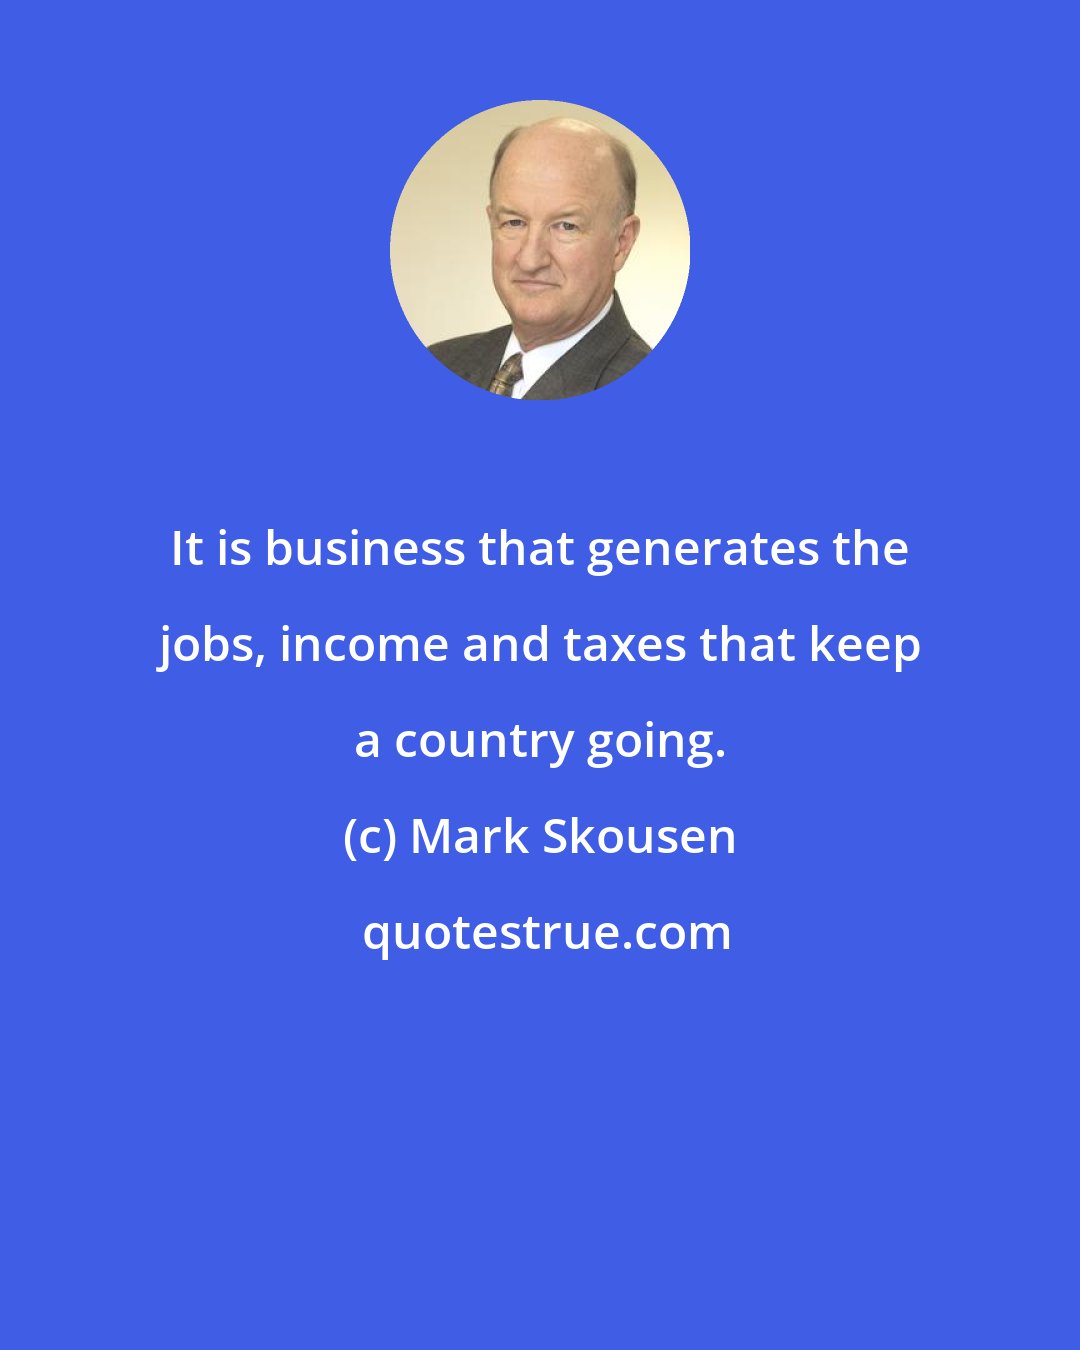 Mark Skousen: It is business that generates the jobs, income and taxes that keep a country going.